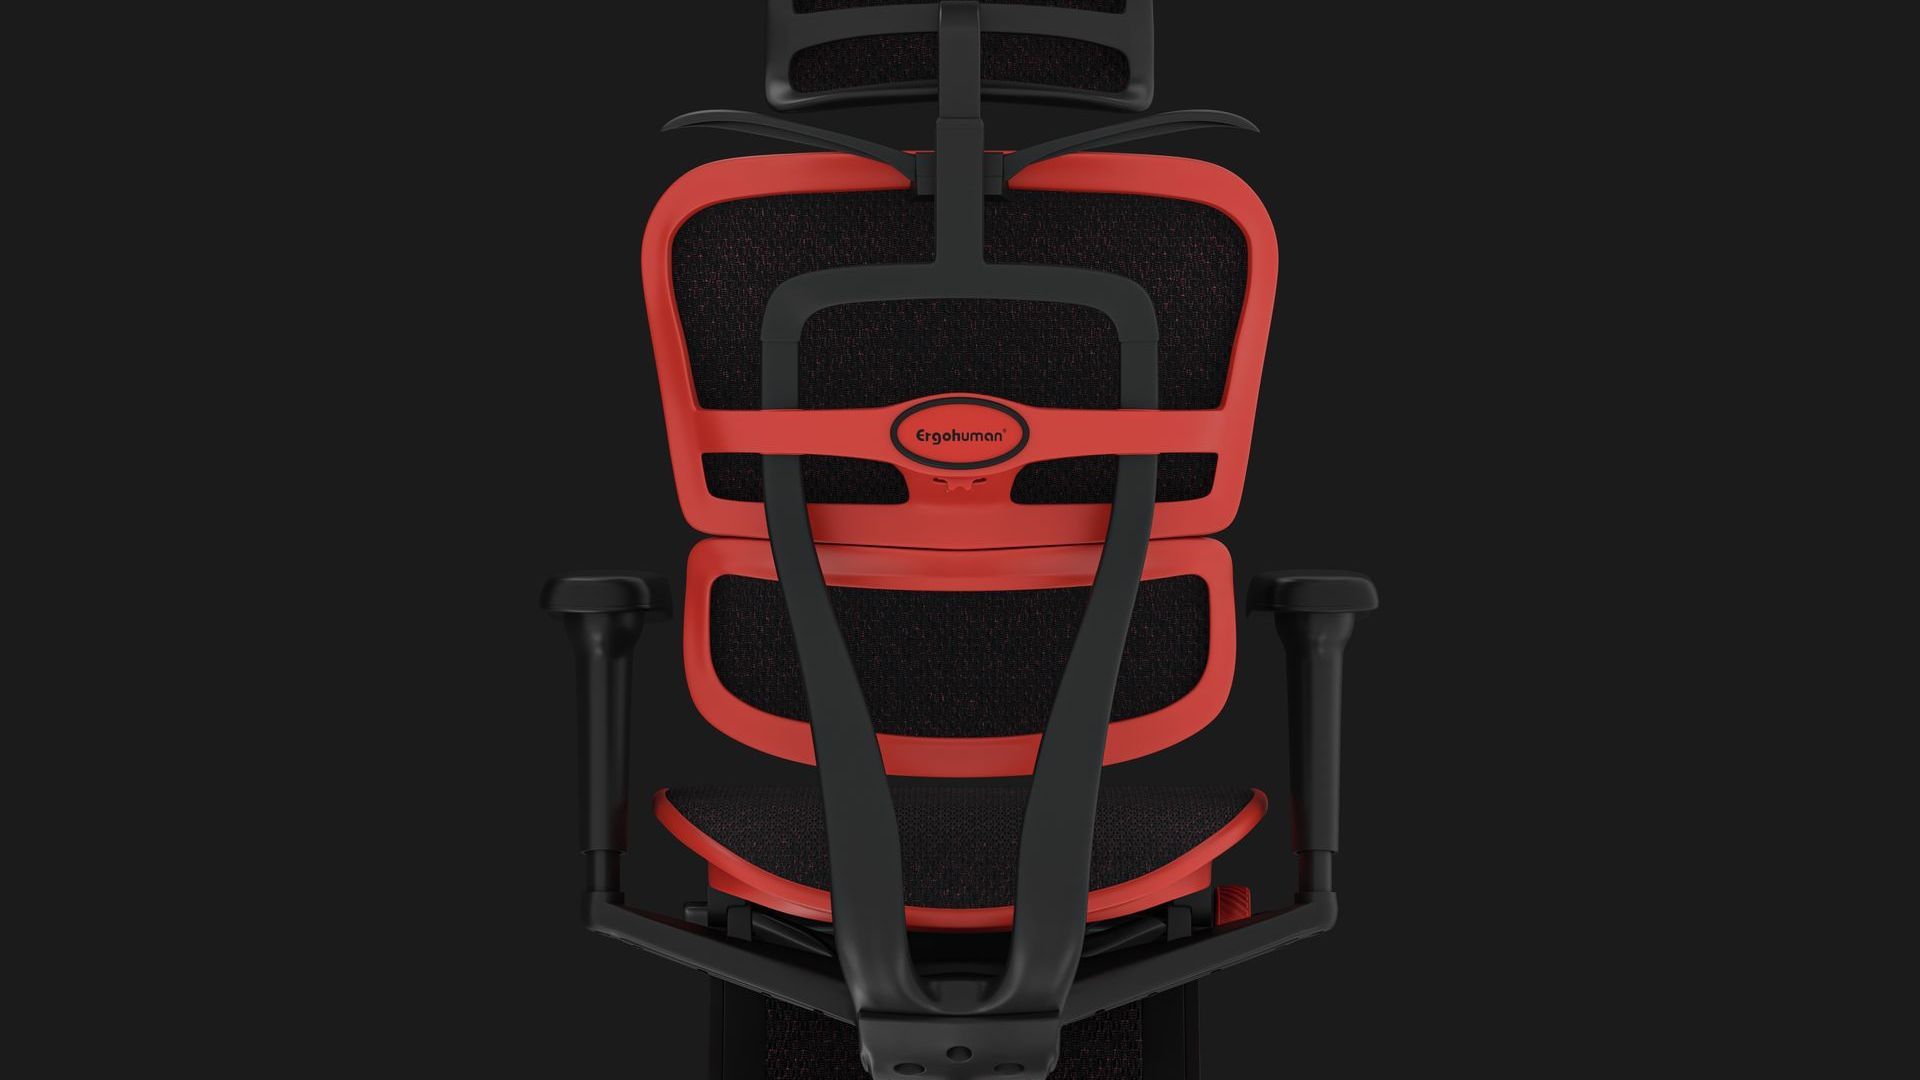 Back view of the Ergohuman Ultra gaming chair with a red frame, coathanger popped open, black background. 